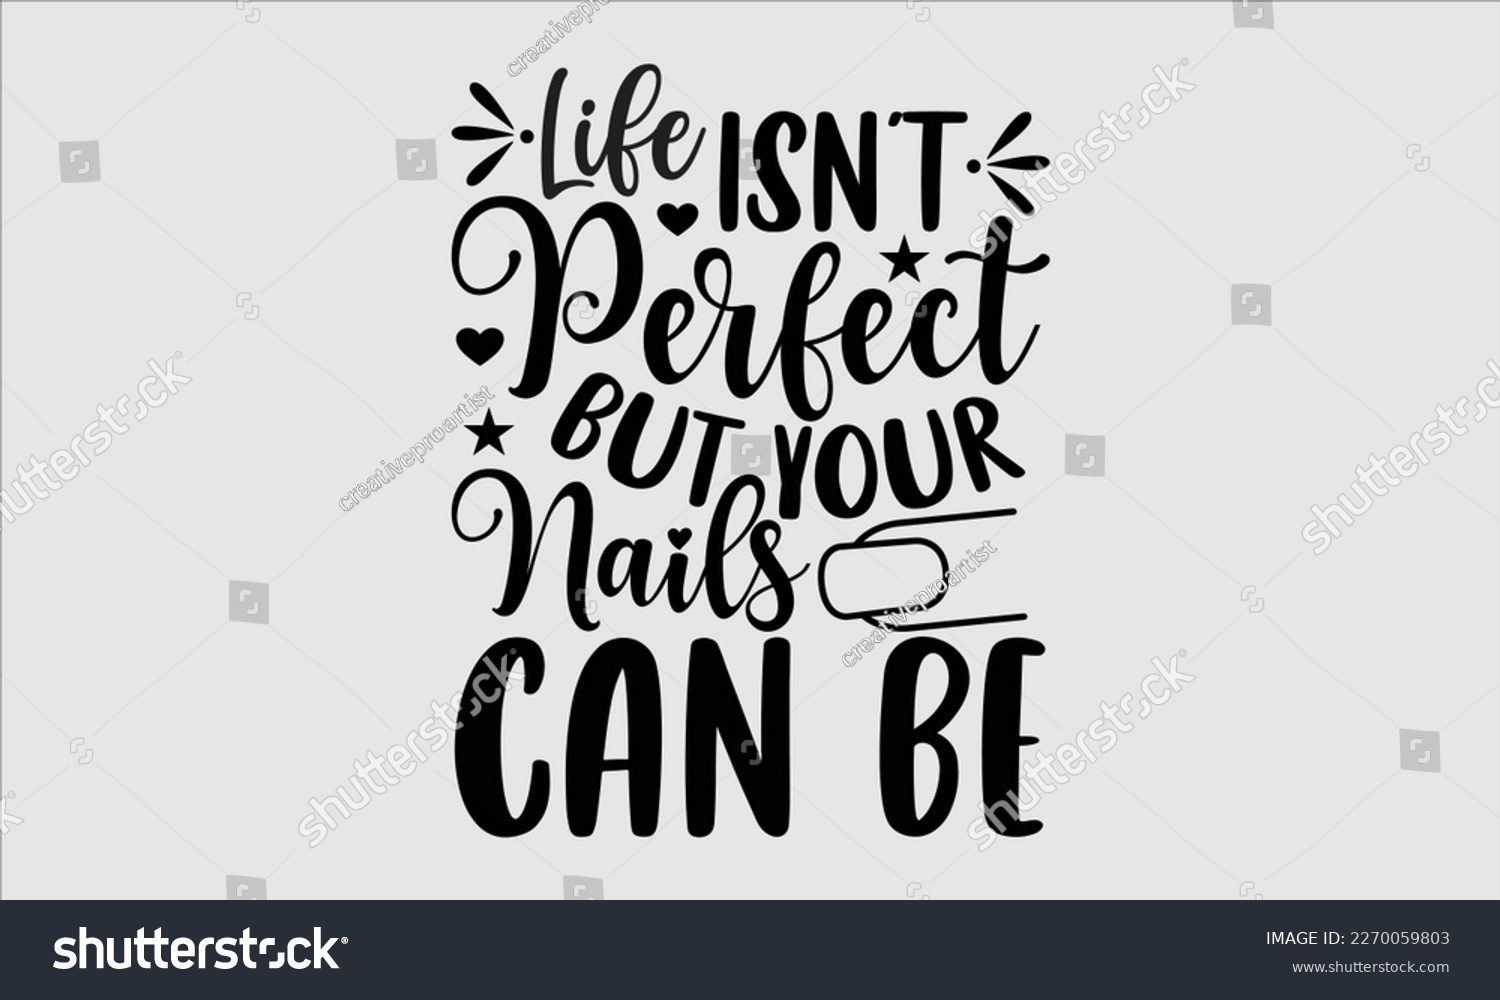 SVG of Life isn't perfect but your nails can be- Nail Tech t shirts design, Hand written lettering phrase, Isolated on white background,  Calligraphy graphic for Cutting Machine, svg eps 10. svg